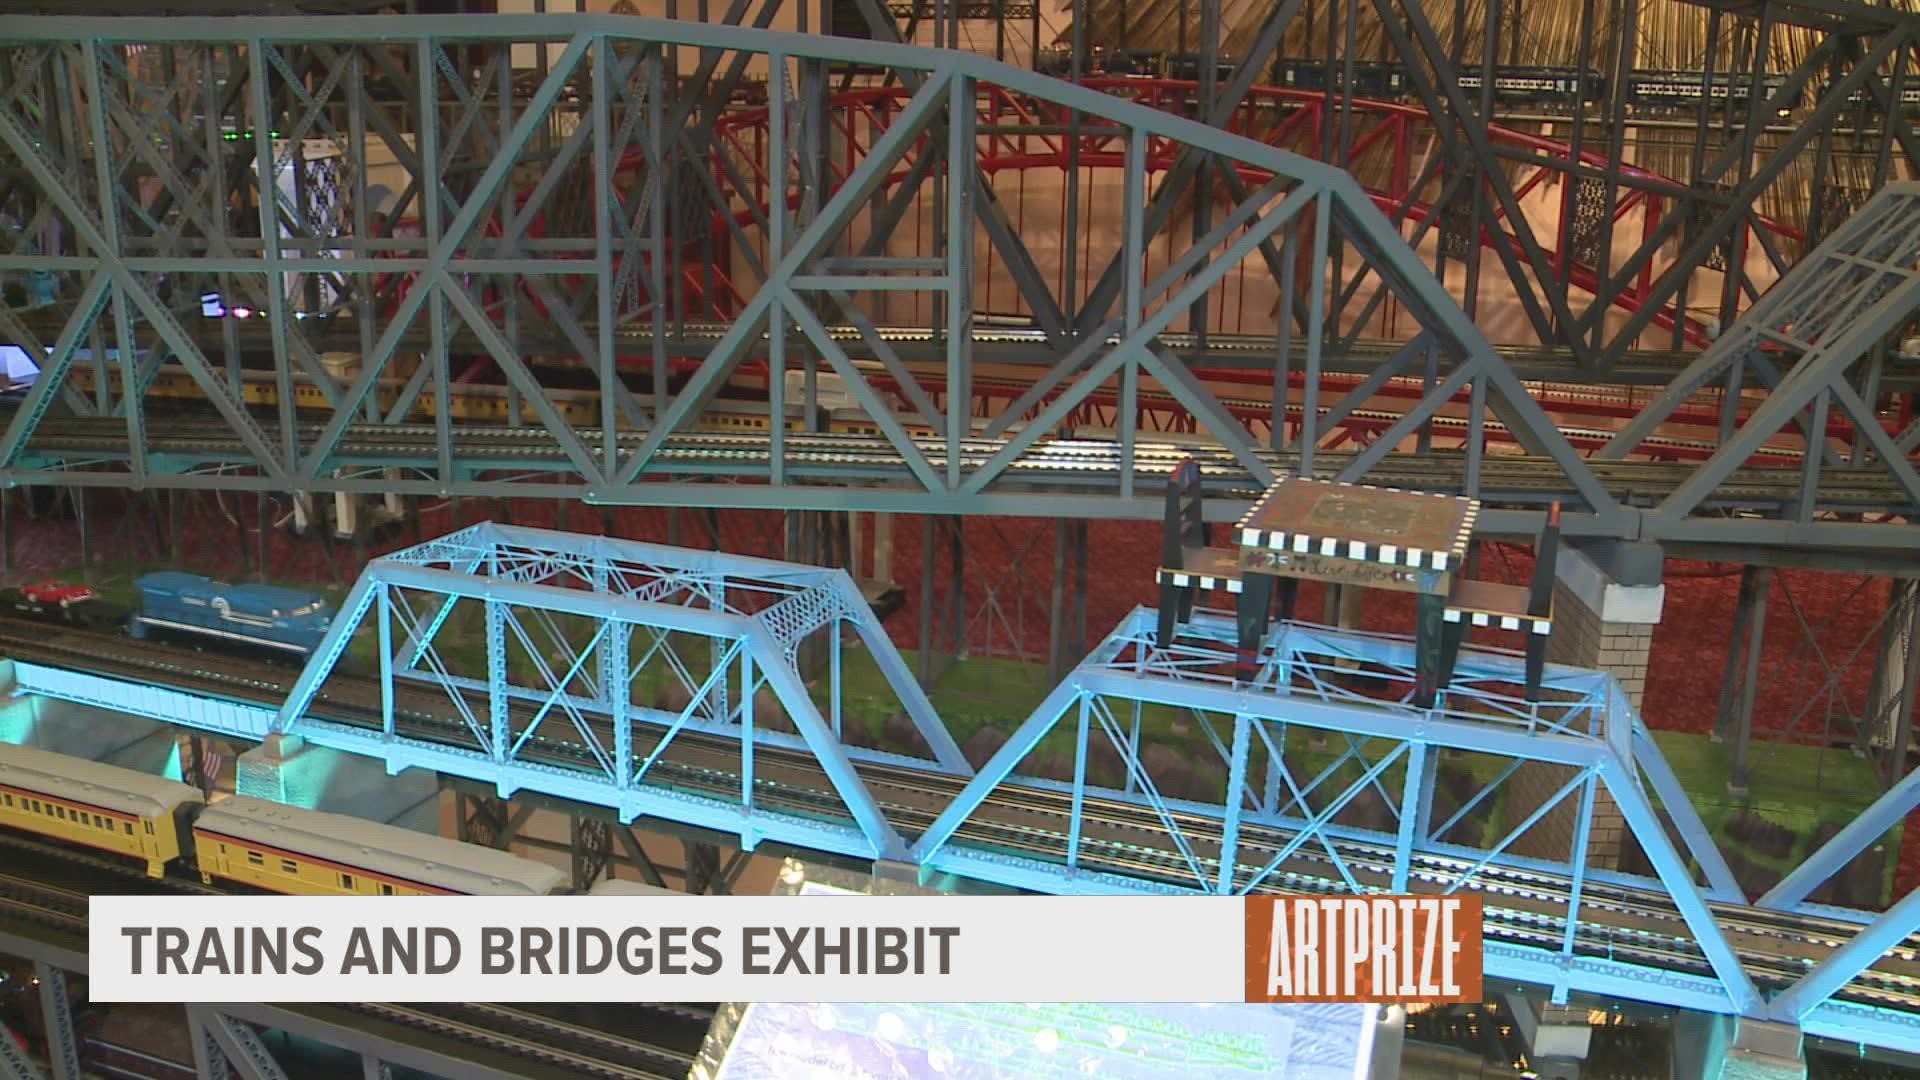 There's plenty to come see at this years ArtPrize.